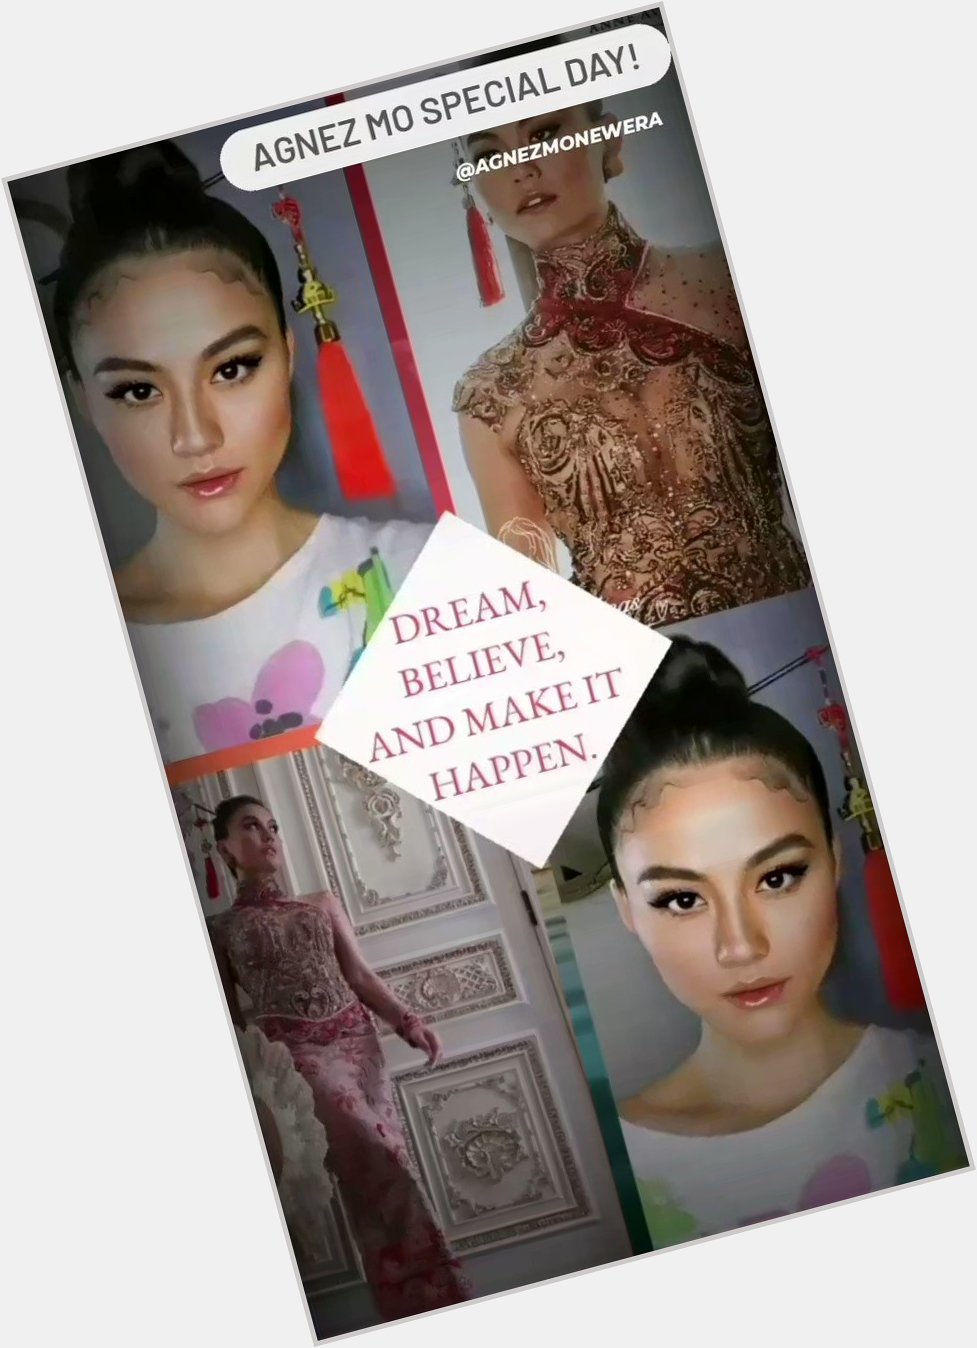 Happy Birthday Agnez Mo  Wish u all the best my Queen Now u officially turn 34 years old, Love u    